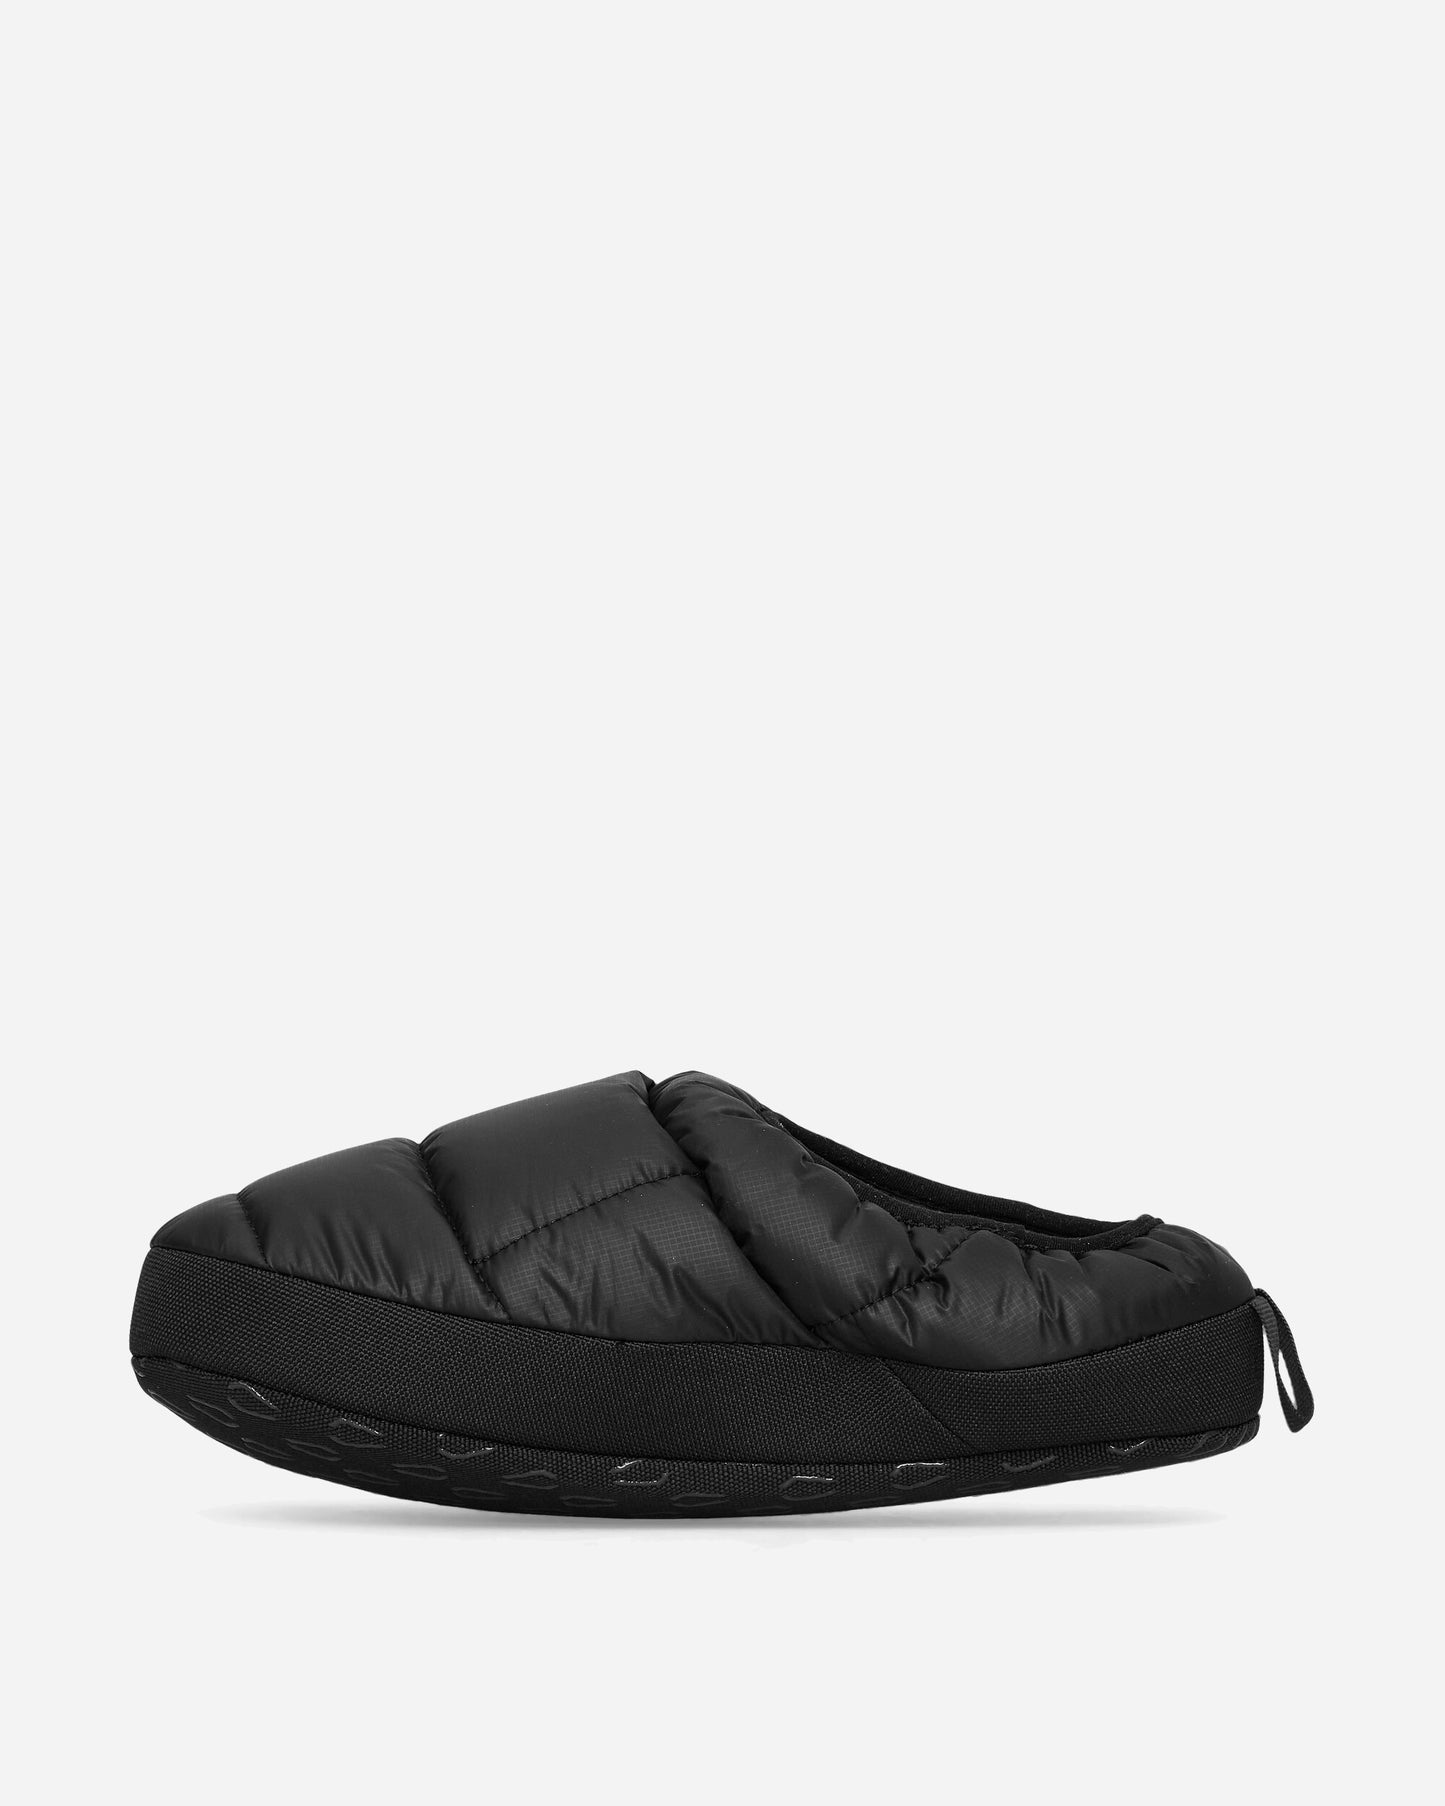 The North Face M Nse Tent Mule Iii Tnf Black/Tnf Black Sandals and Slides Sandals and Mules NF00AWMG KX71